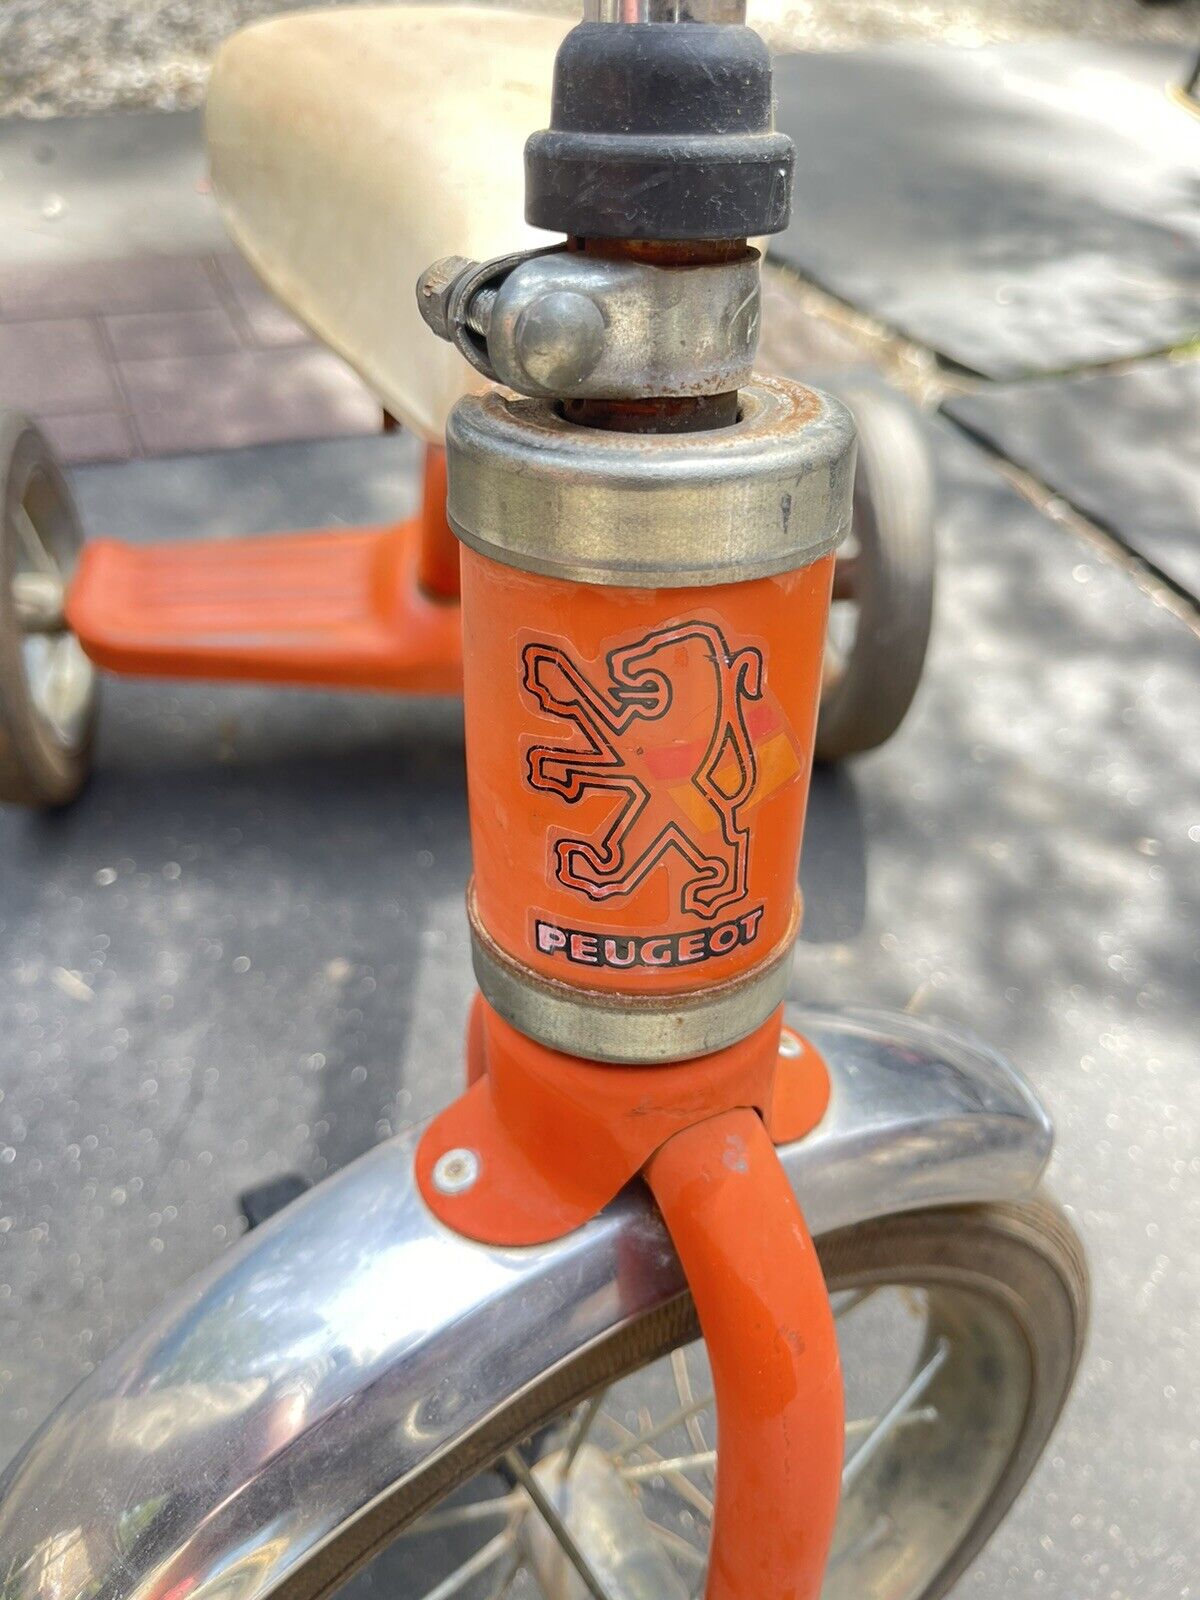 VINTAGE “PEUGEOT” (1970s)CHILDRENS TRI-CYCLE(NOT RESTORED) 100% ALL ORIGINAL